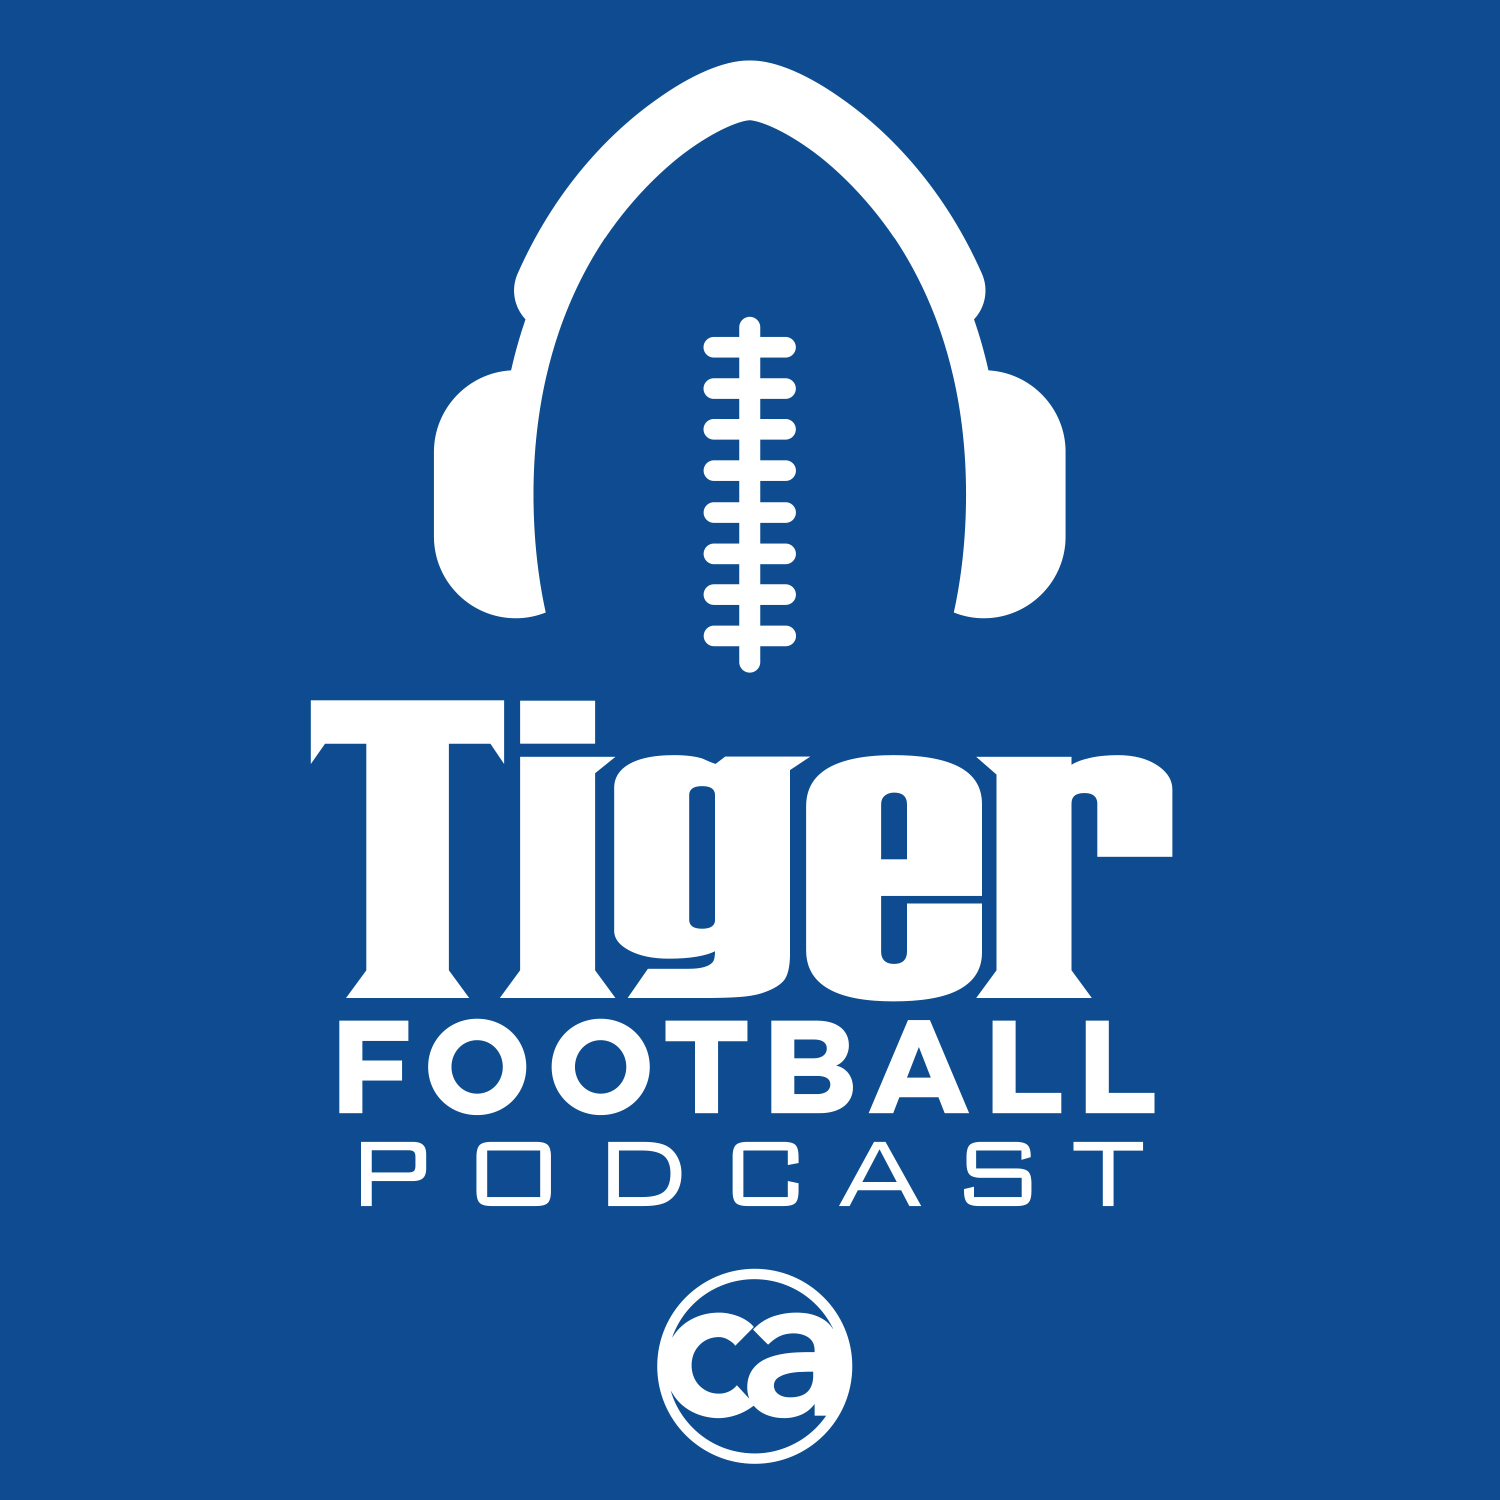 Tiger Football Podcast: Picking AAC games against the line, Week 3